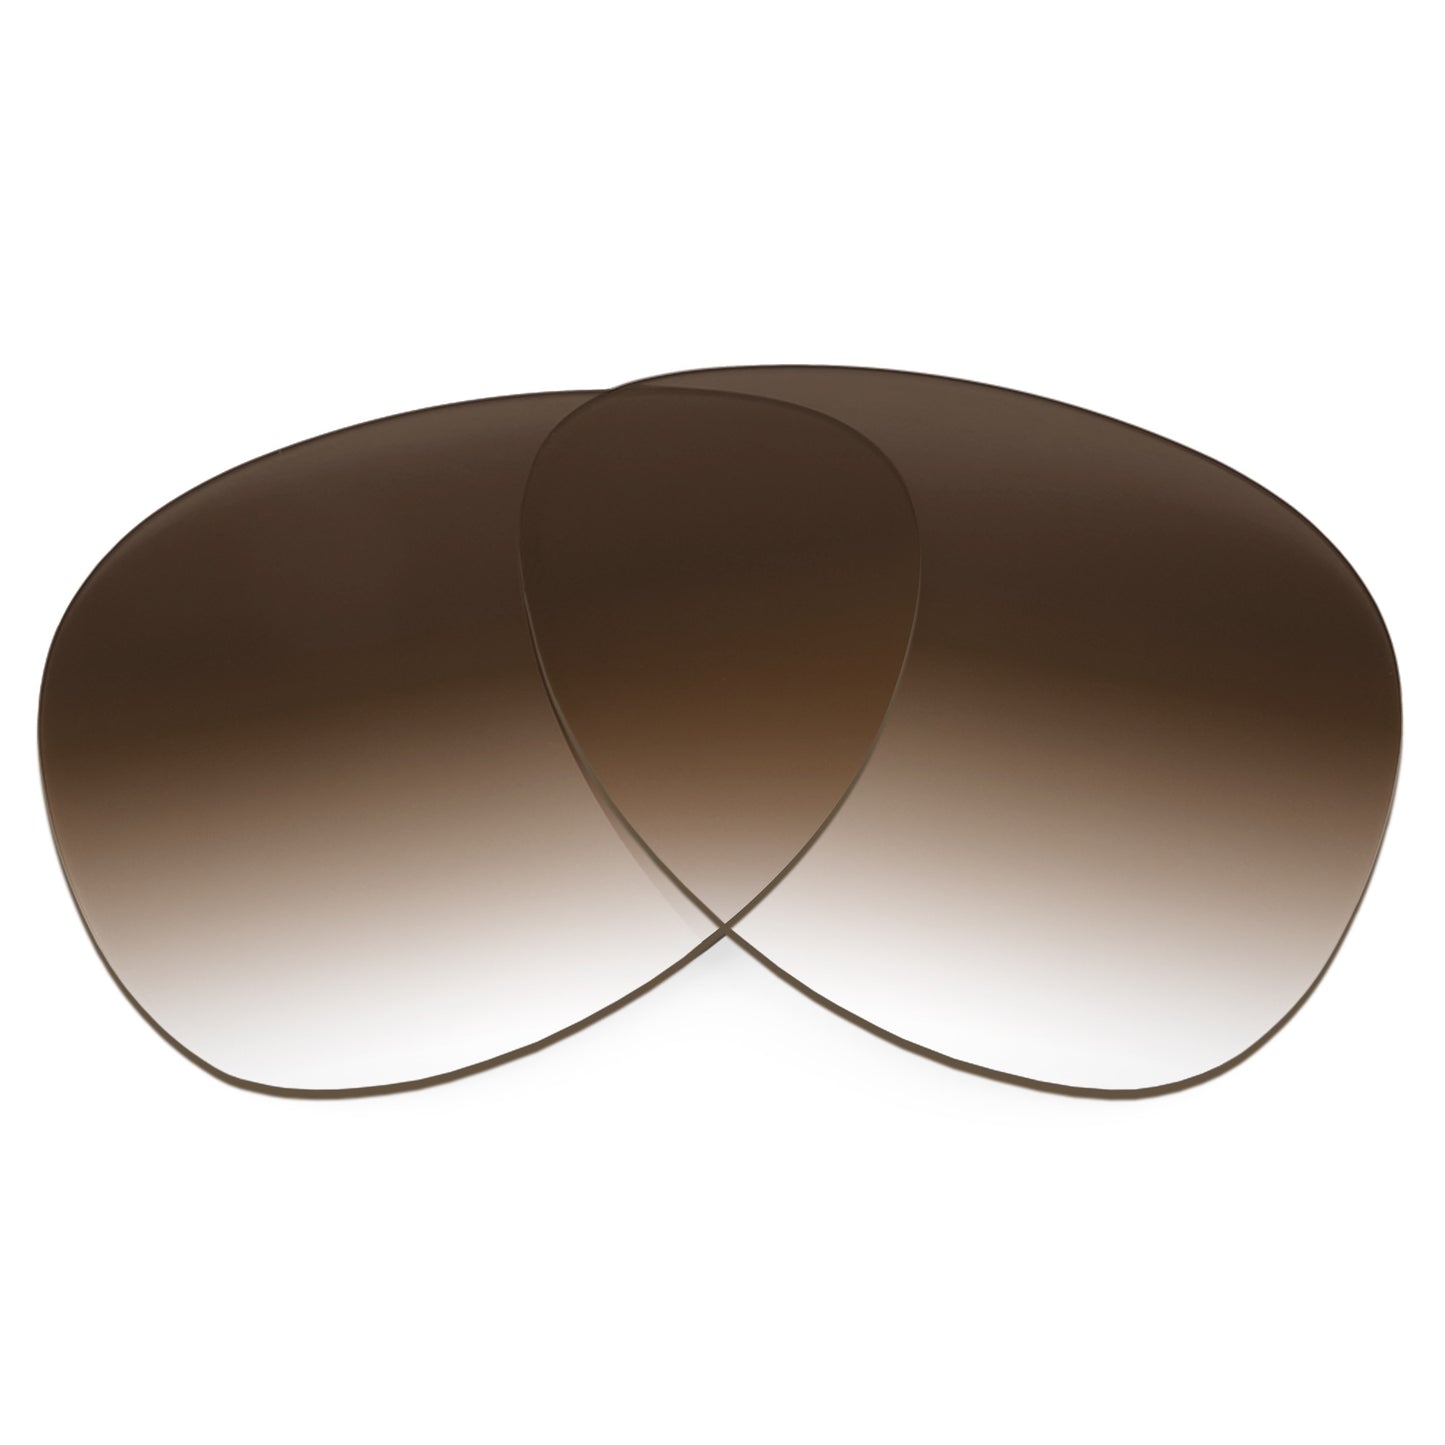 Revant replacement lenses for Ray-Ban Aviator RB3025 58mm Non-Polarized Brown Gradient